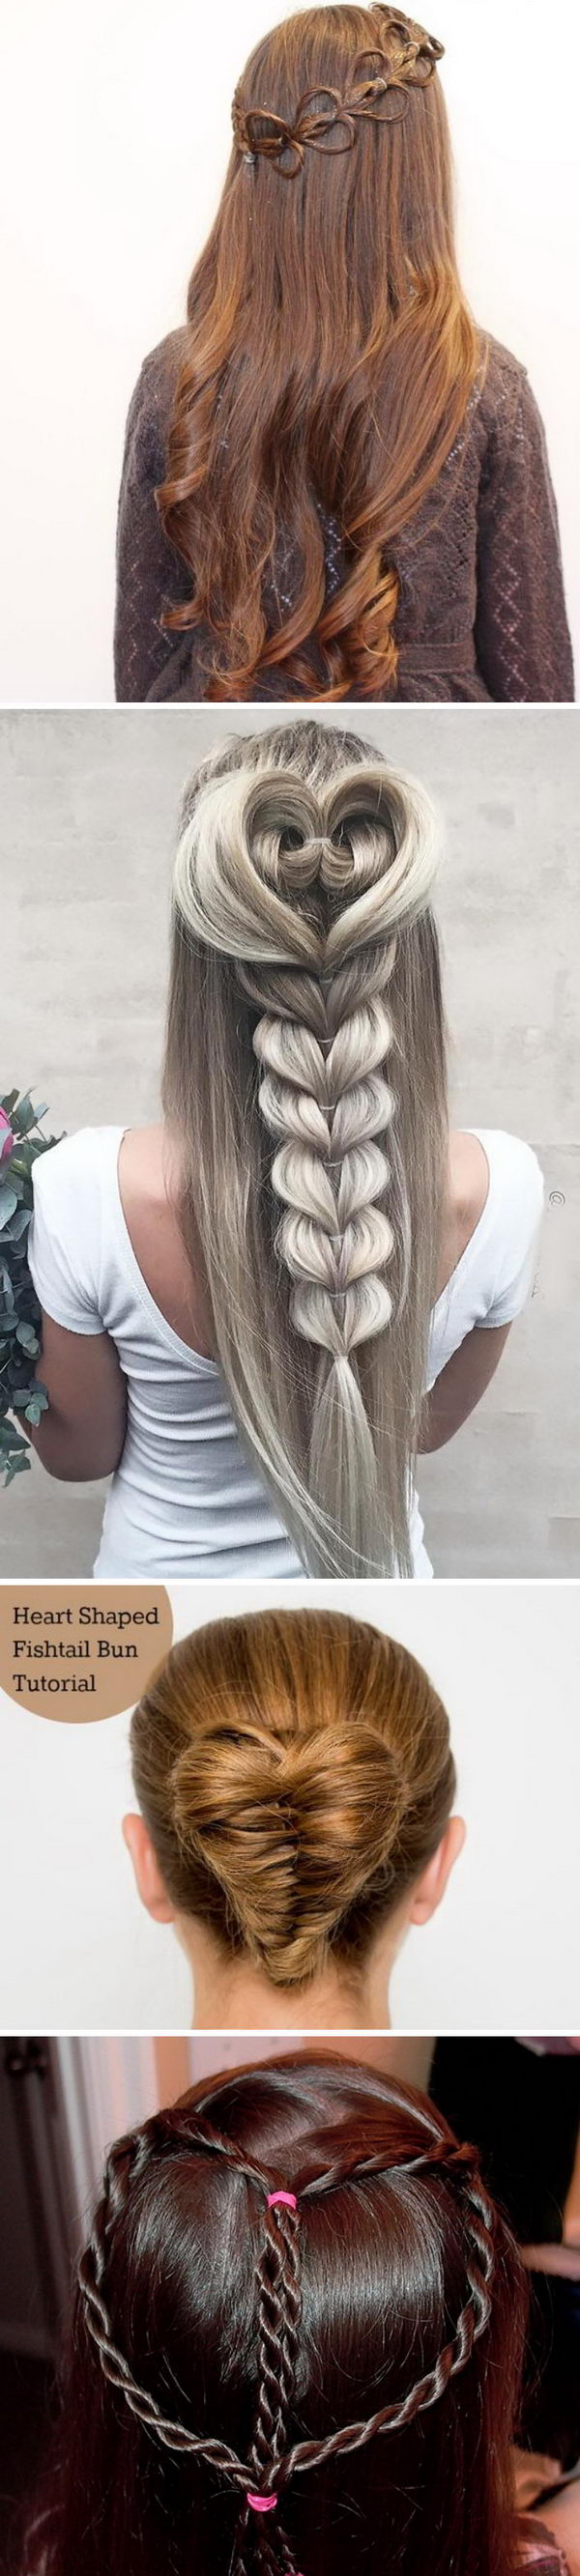 15+ Great Valentine's Day Hairstyles for Girls. 